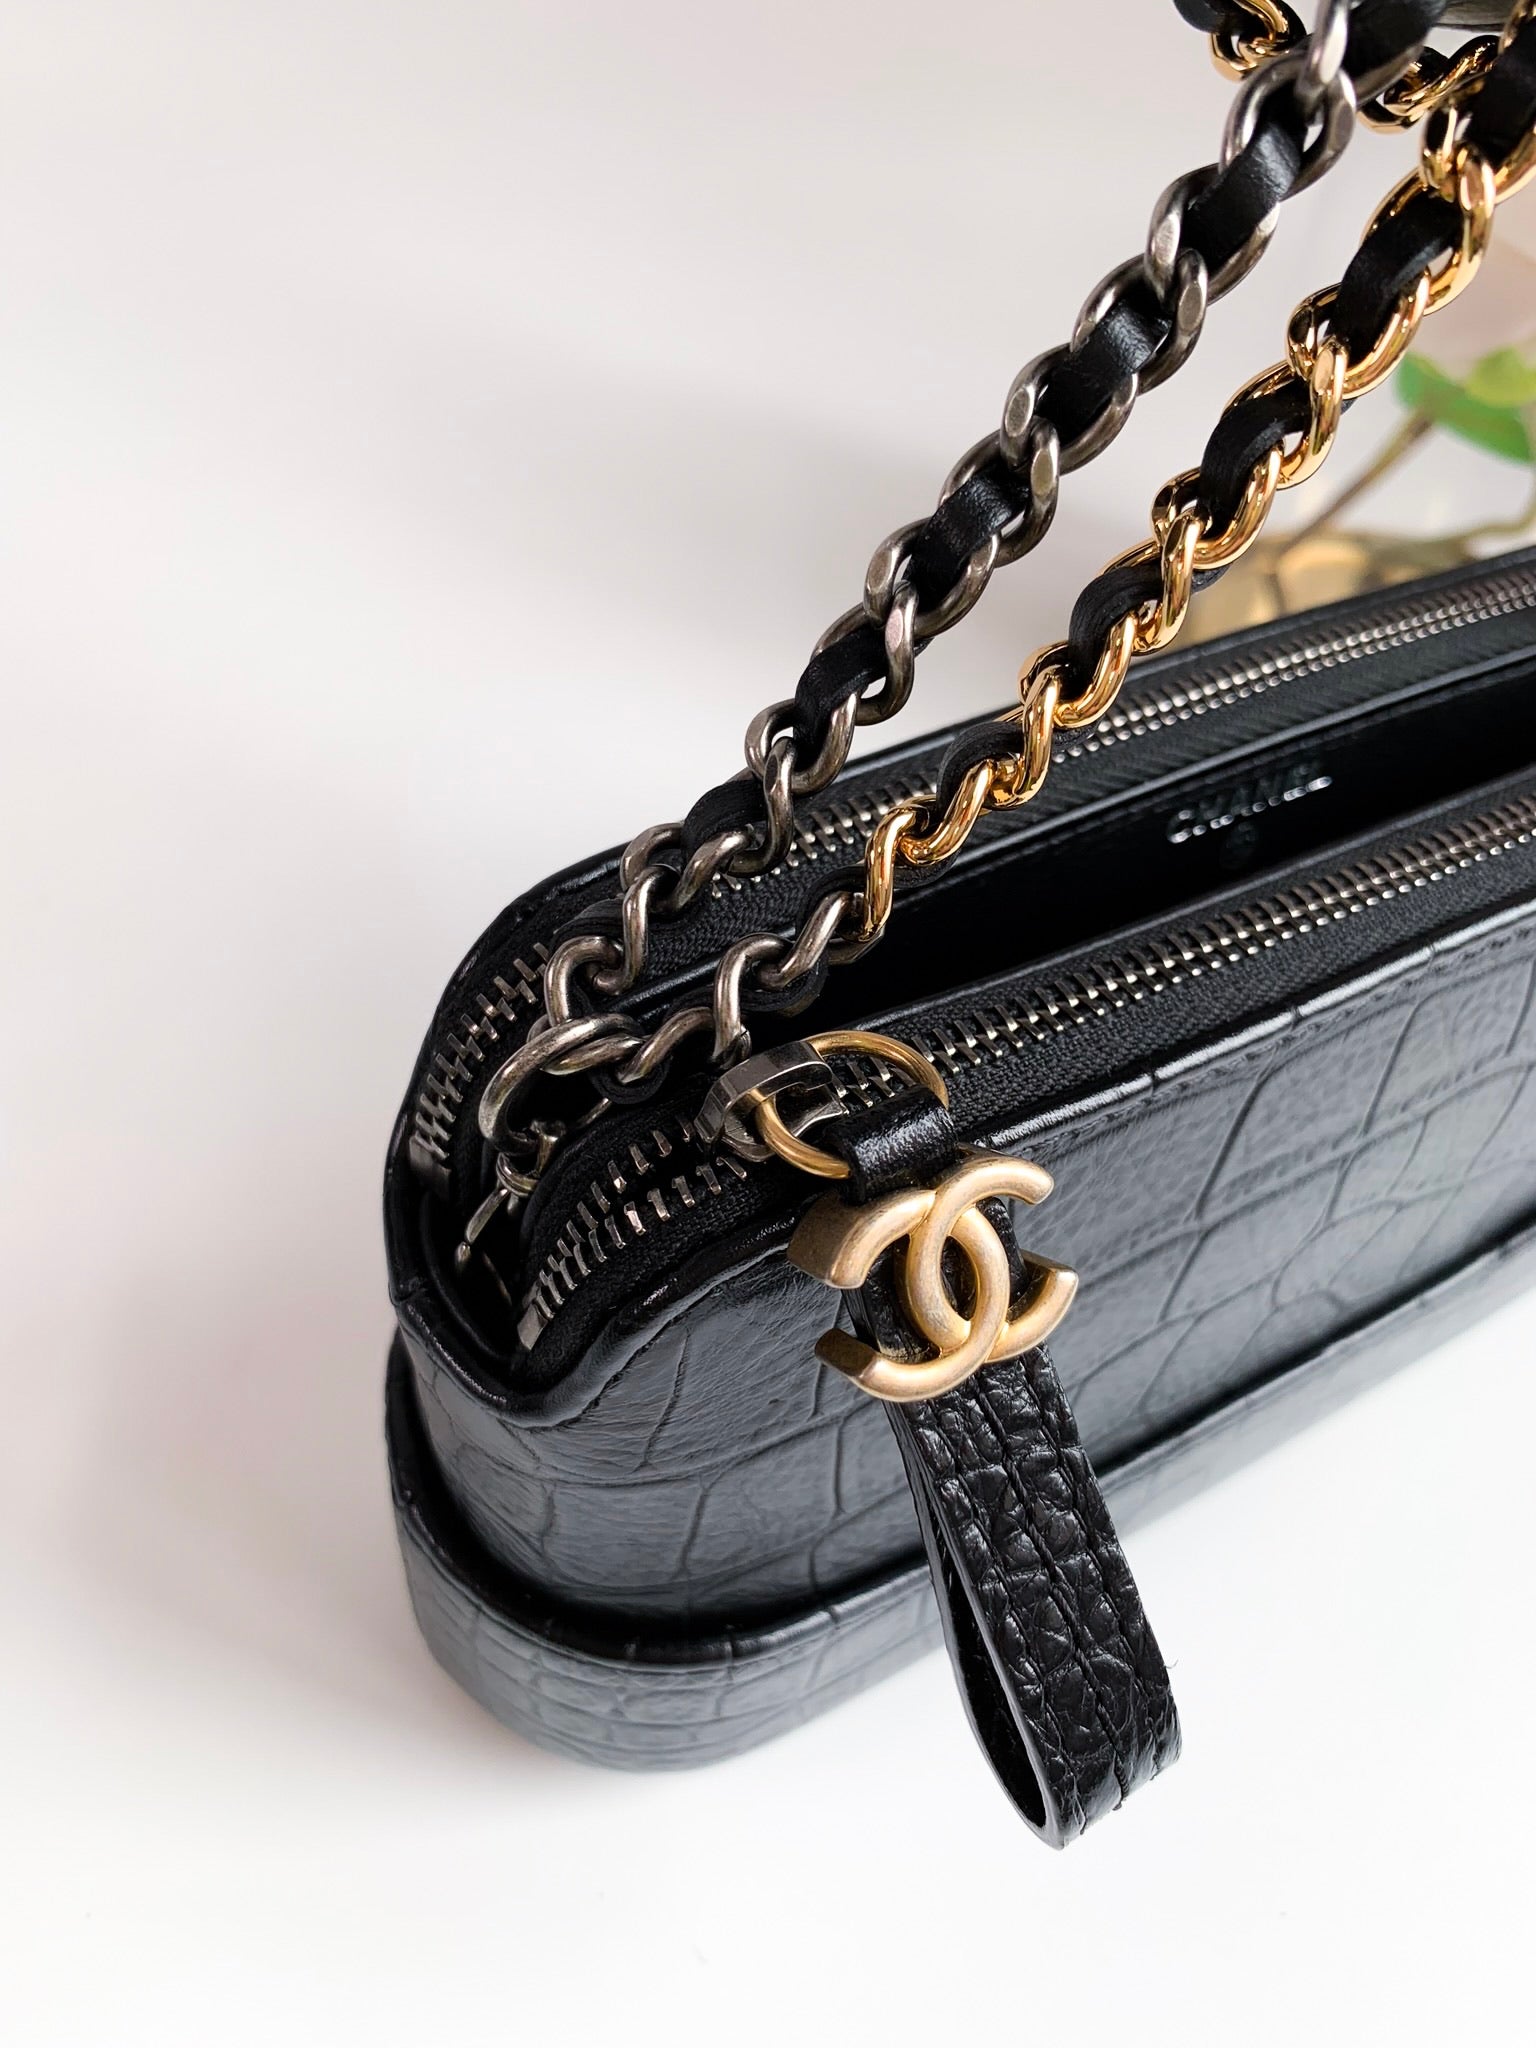 Chanel Croc-Embossed Gabrielle Clutch With Chain – Coco Approved